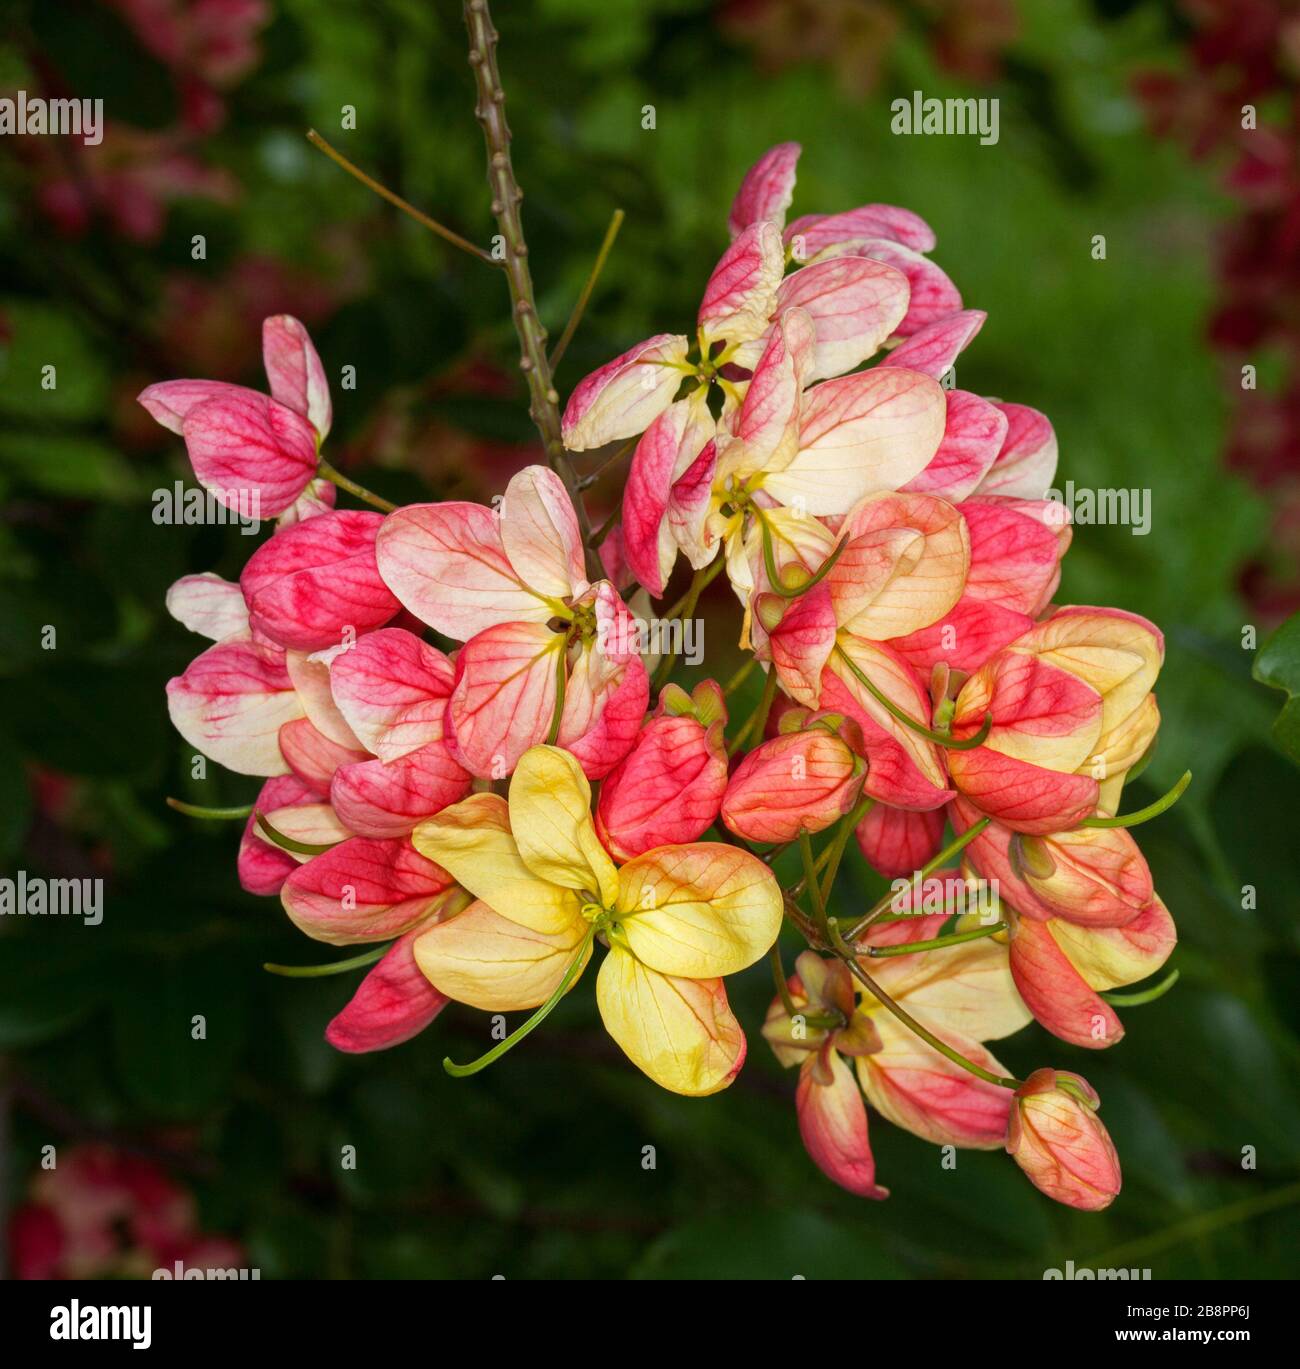 Cluster of stunning pink & yellow flowers of rare Rainbow Shower tree, Cassia fistula x  javanica, against background of green foliage Stock Photo